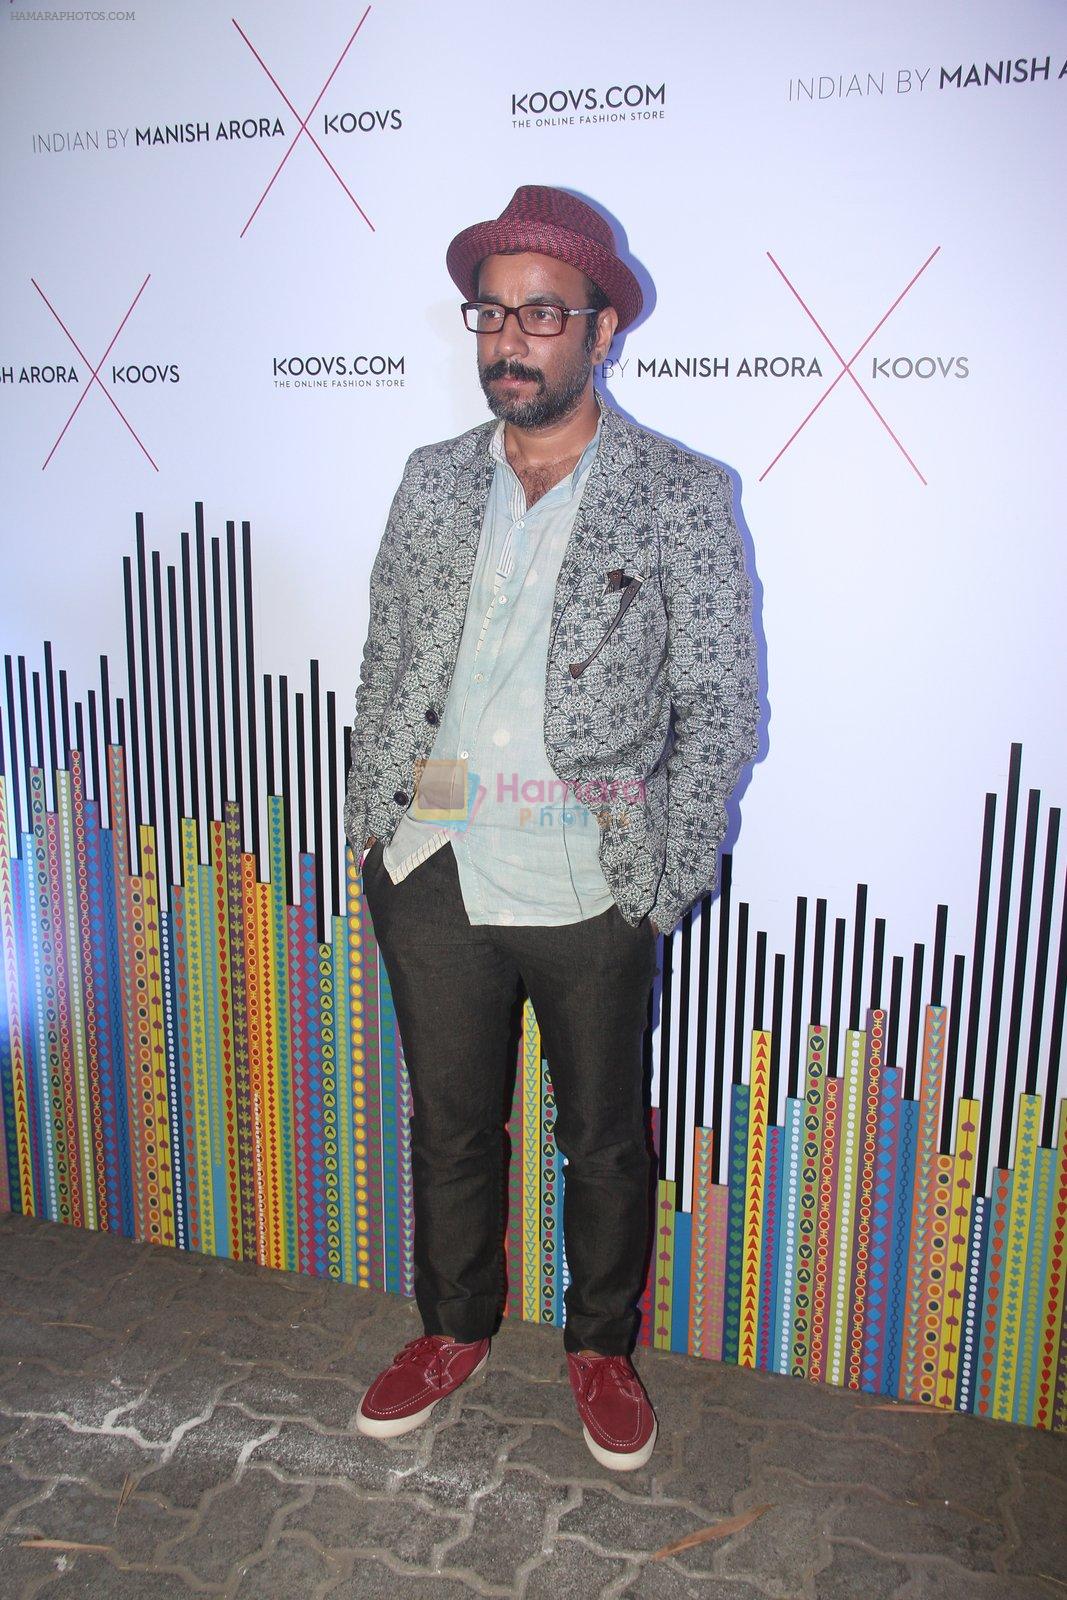 at Indian by Manish Arora for Koovs.com on 1st April 2016